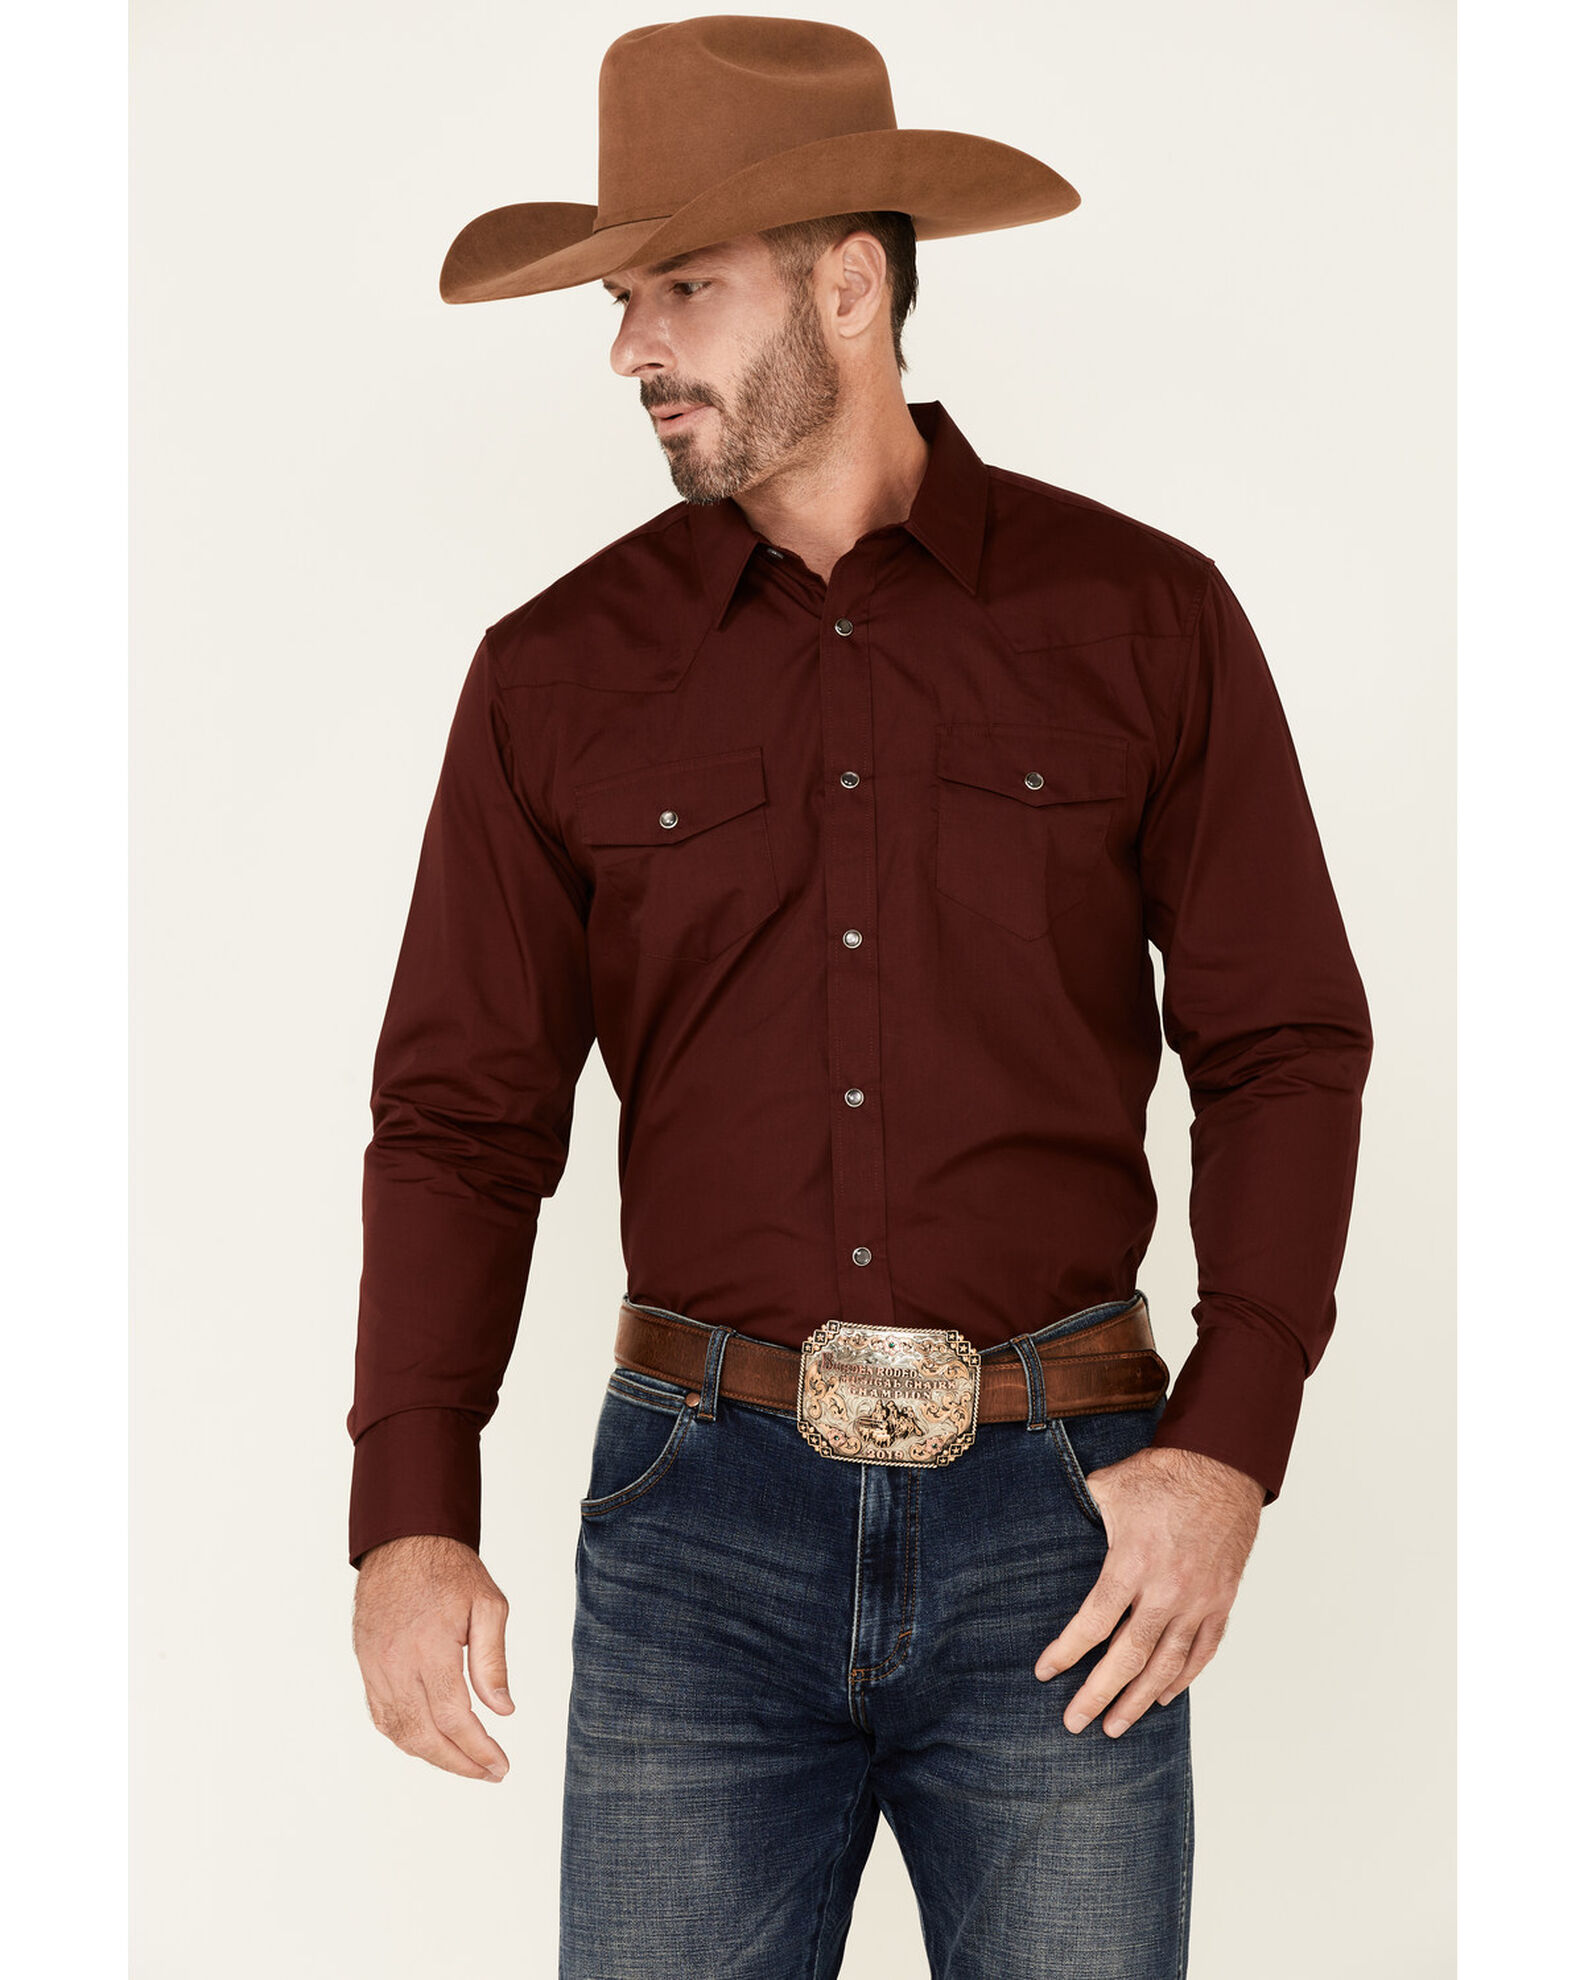 Product Name: Gibson Men's Basic Solid Long Sleeve Pearl Snap Western Shirt